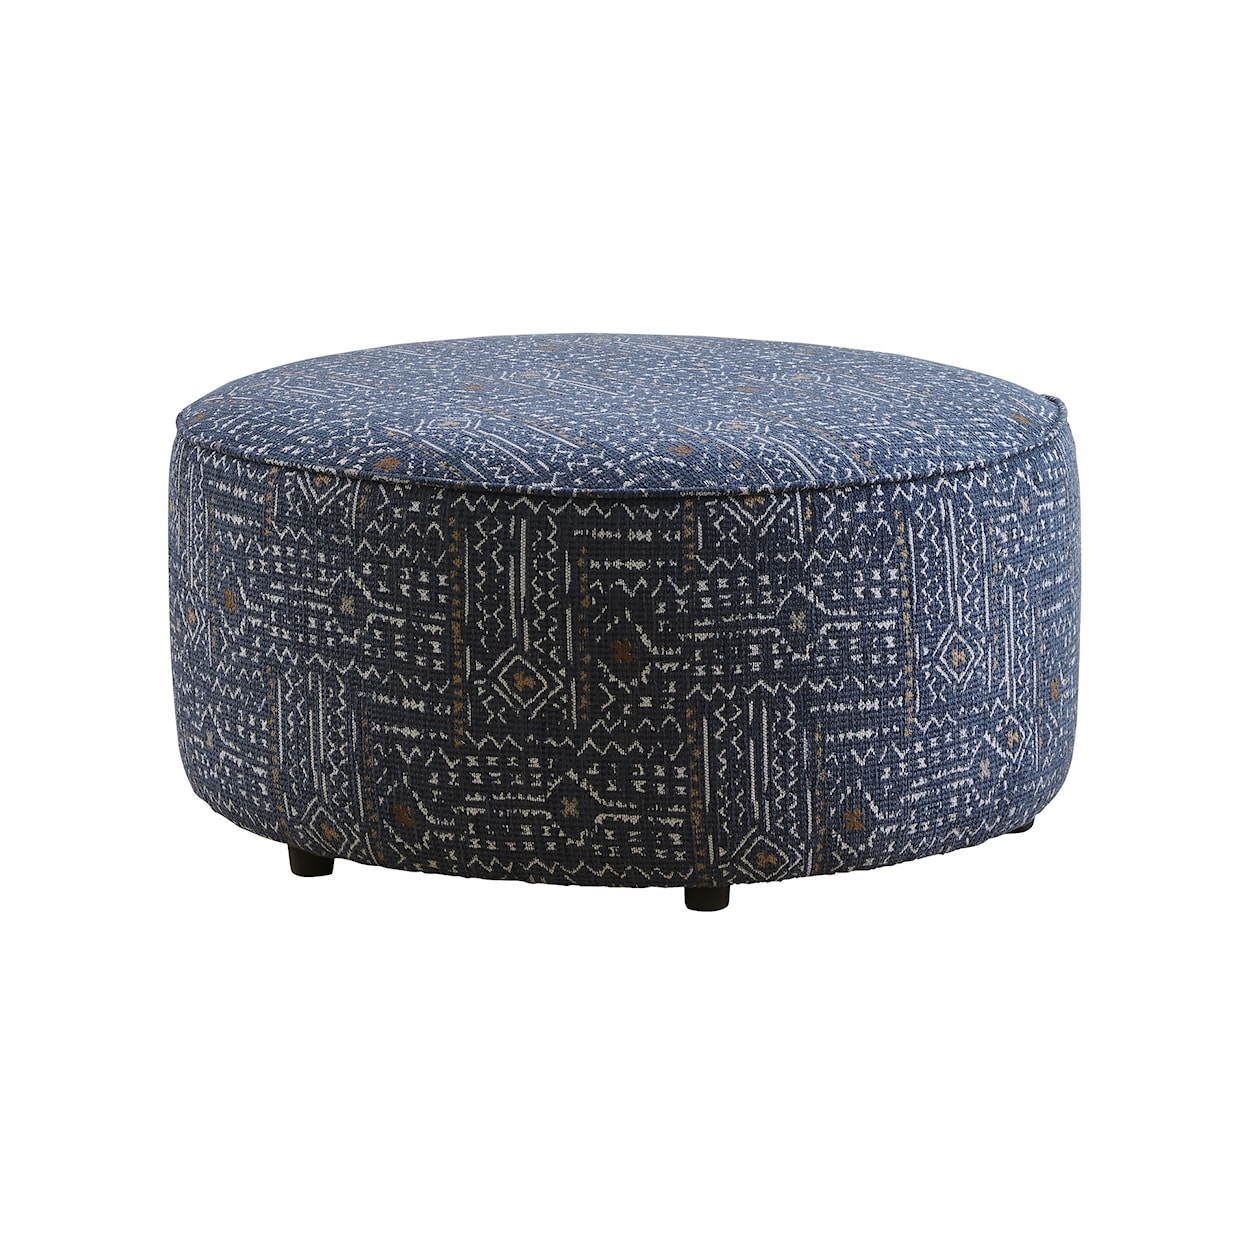 Fusion Furniture 5005 HERZL DENIM LOXLEY COCONUT Cocktail Ottoman